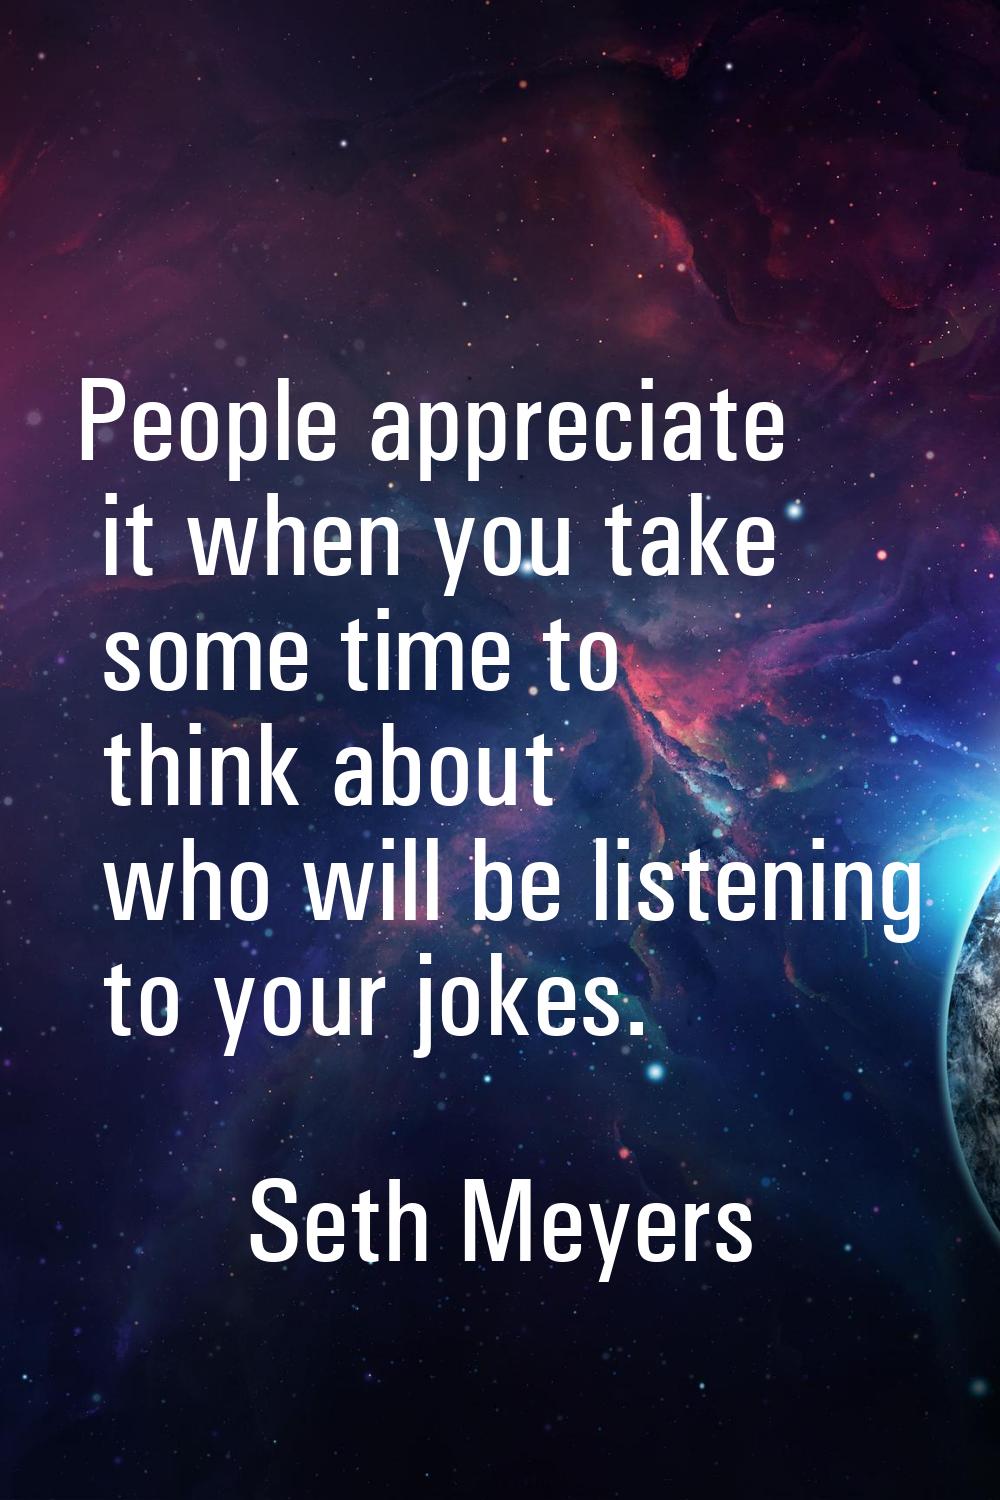 People appreciate it when you take some time to think about who will be listening to your jokes.